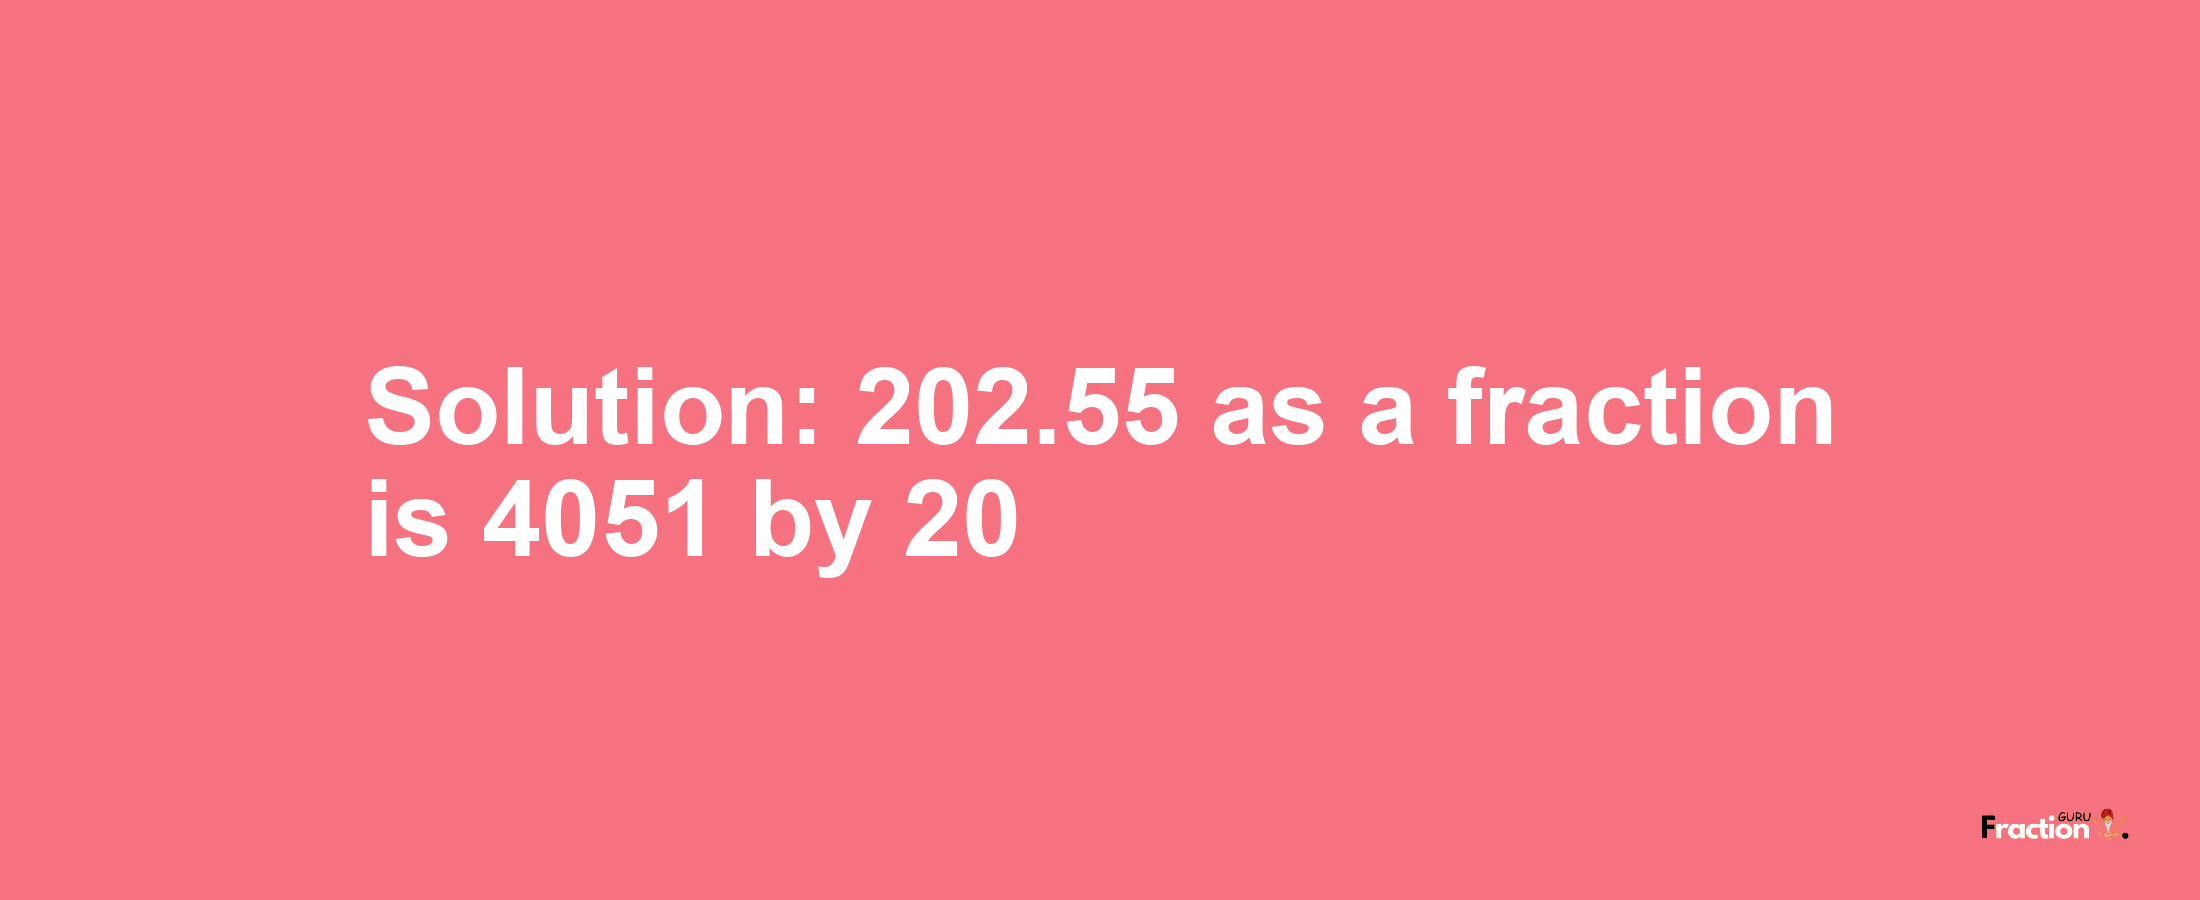 Solution:202.55 as a fraction is 4051/20